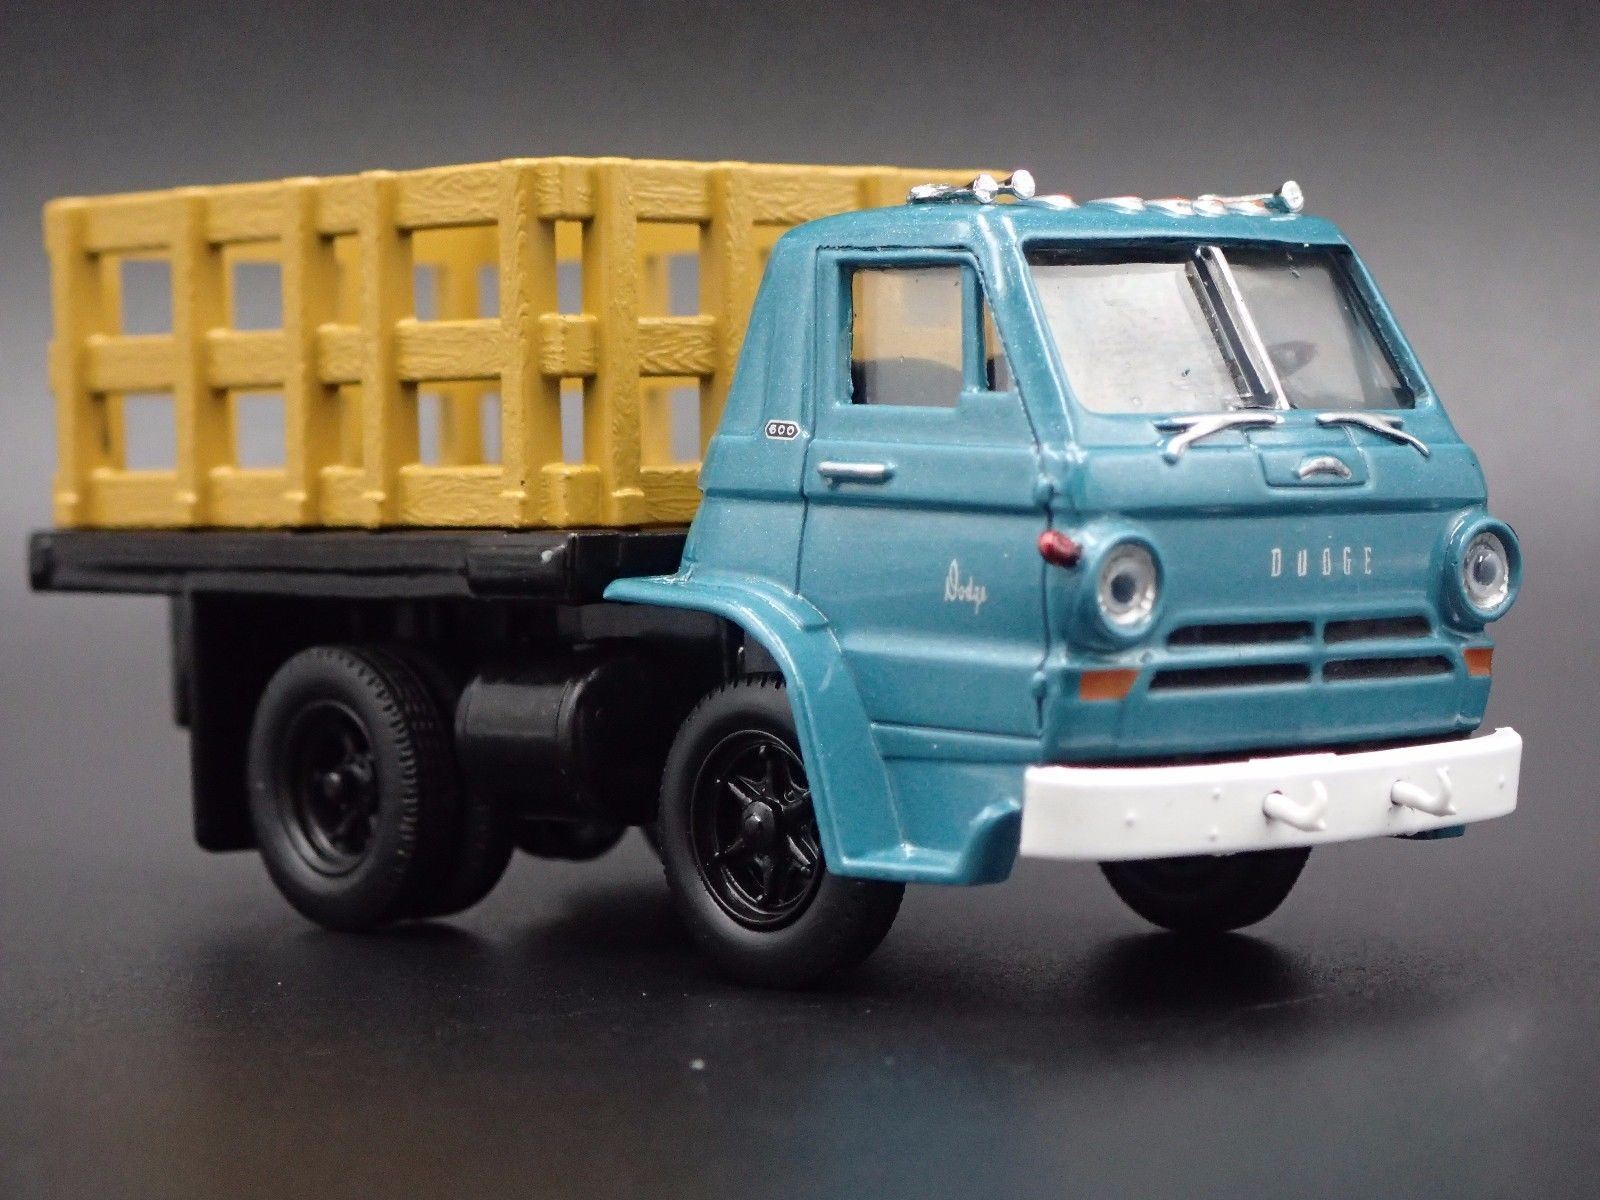 1966 66 DODGE COE L600 STAKEBED TRUCK RARE 1:64 SCALE DIORAMA DIECAST relisted